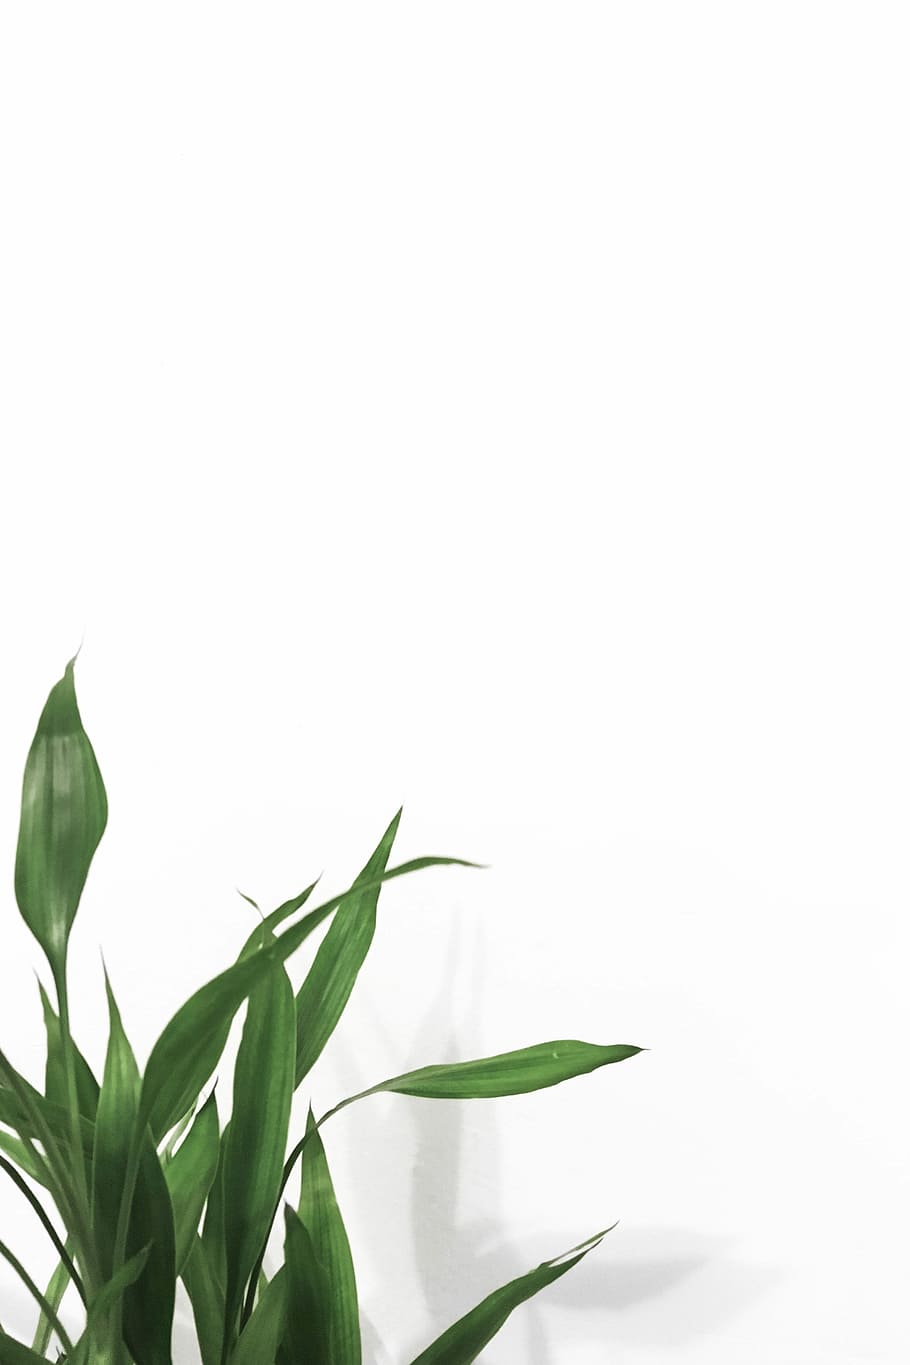 linear leaf plants near white wall, green linear leafed plant with white background